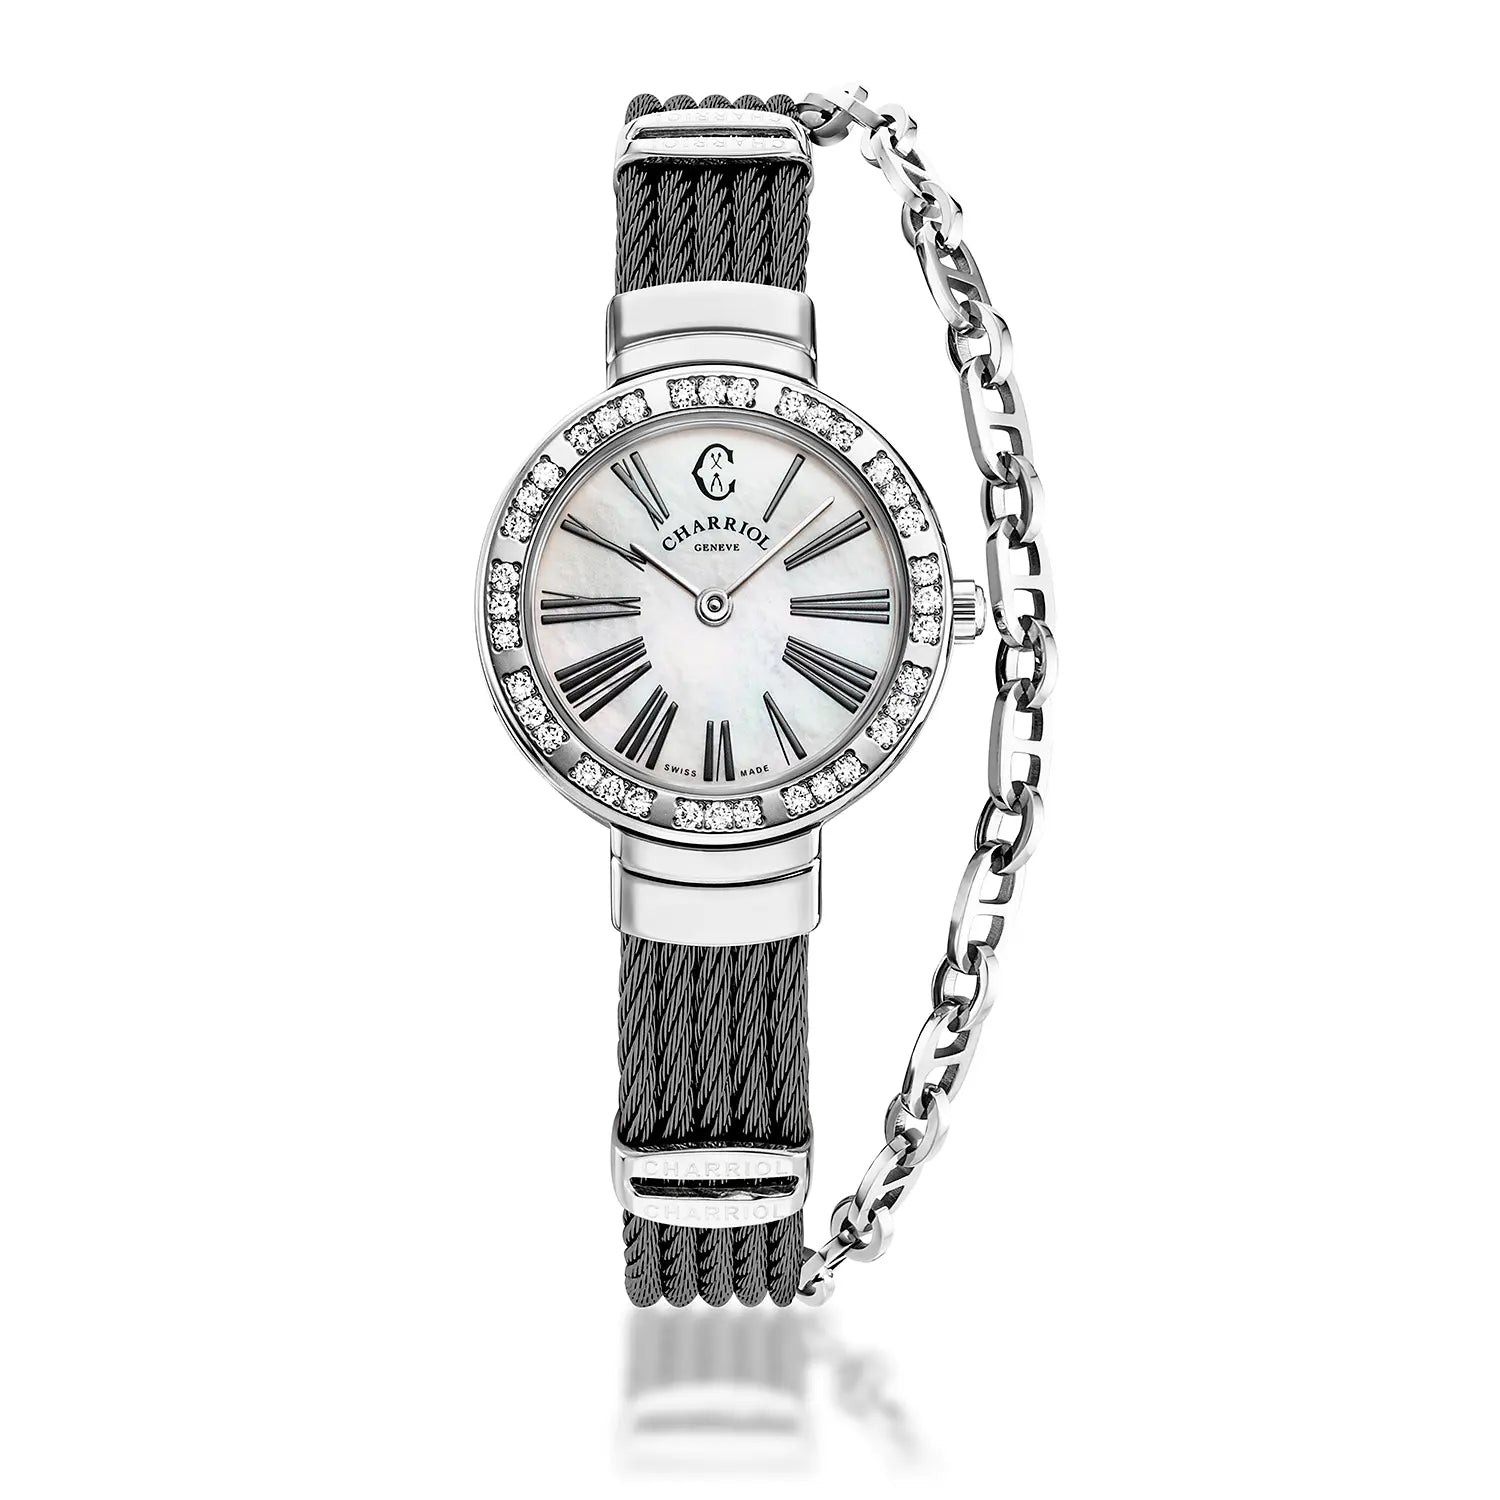 ST TROPEZ, 25MM, QUARTZ CALIBRE, WHITE MOTHER-OF-PEARL WITH ROMAN NUMERALS DIAL, STEEL WITH 36 DIAMONDS BEZEL, STEEL BLACK PVD CABLE BRACELET - Charriol Geneve -  Watch